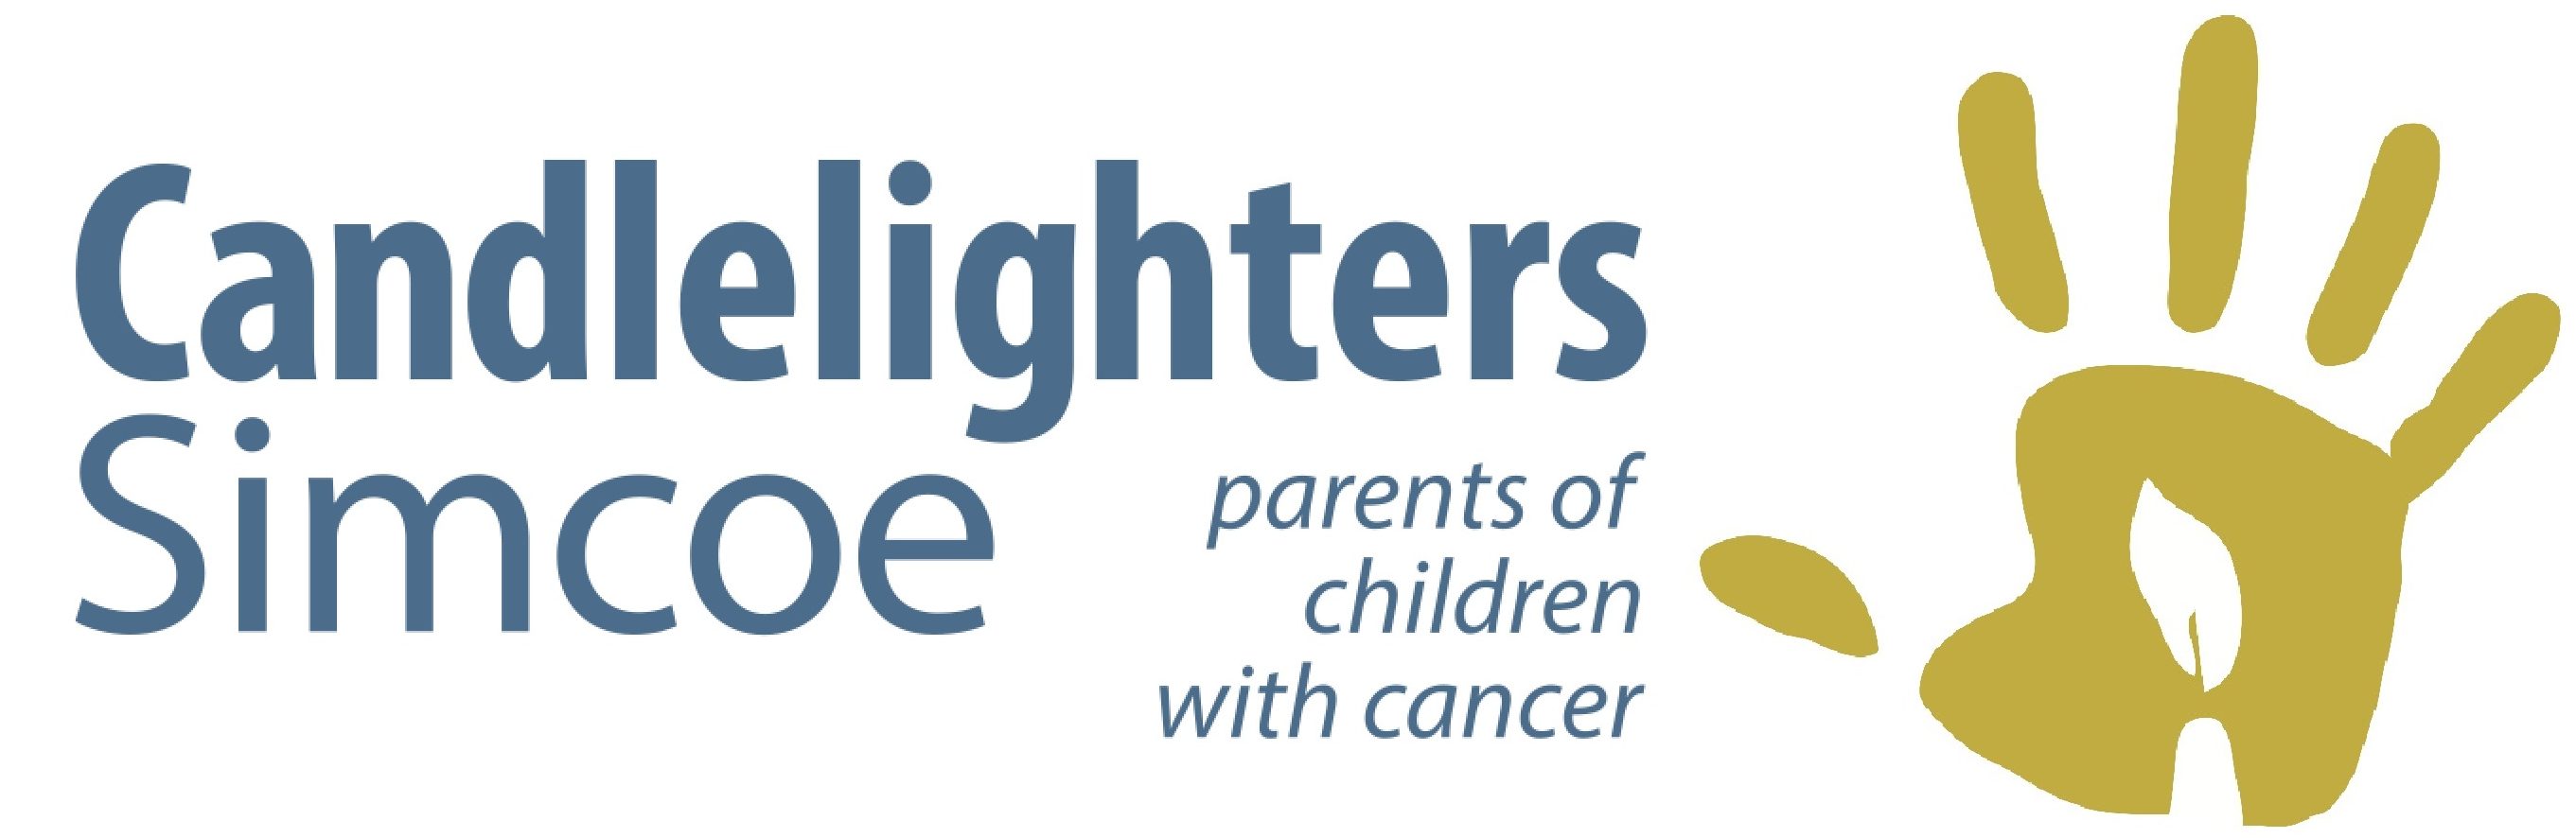 Candlelighters Simcoe-Parents of Children with Cancer logo